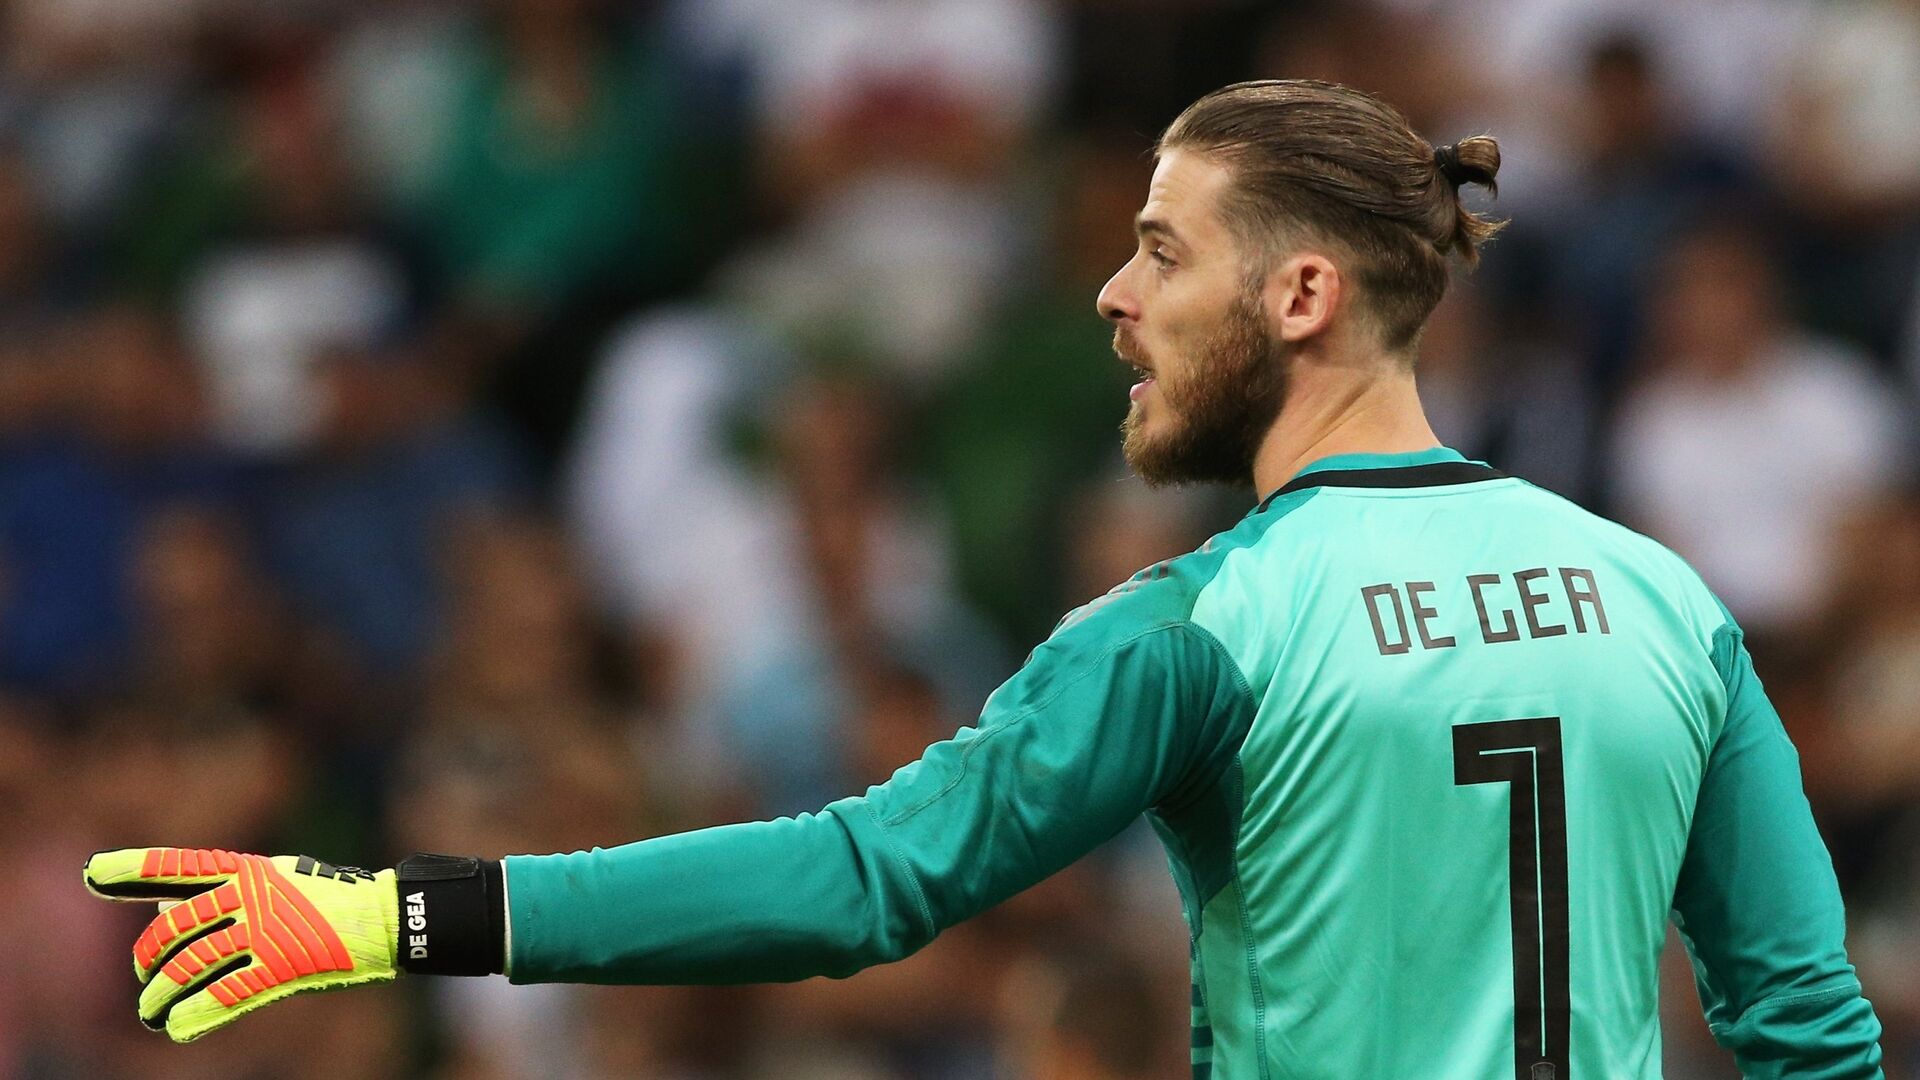 Spain's goalkeeper David de Gea points during a friendly match between Tunisia's and Spain's national soccer teams ahead of the World Cup in Krasnodar, Russia, June 9, 2018 - اسپوتنیک افغانستان  , 1920, 22.08.2022